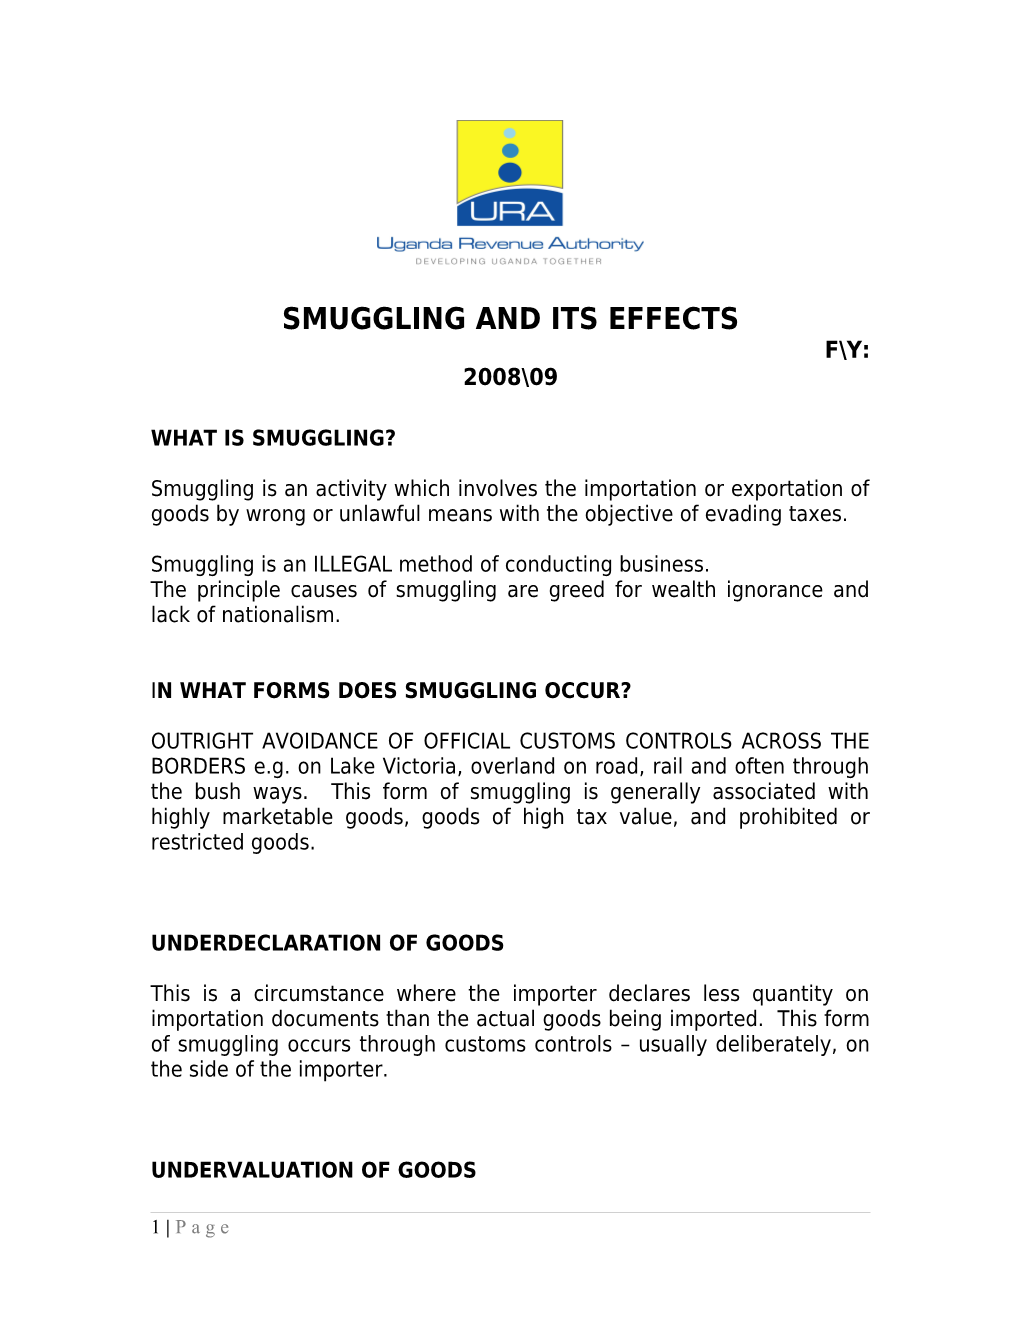 Smuggling and Its Effects